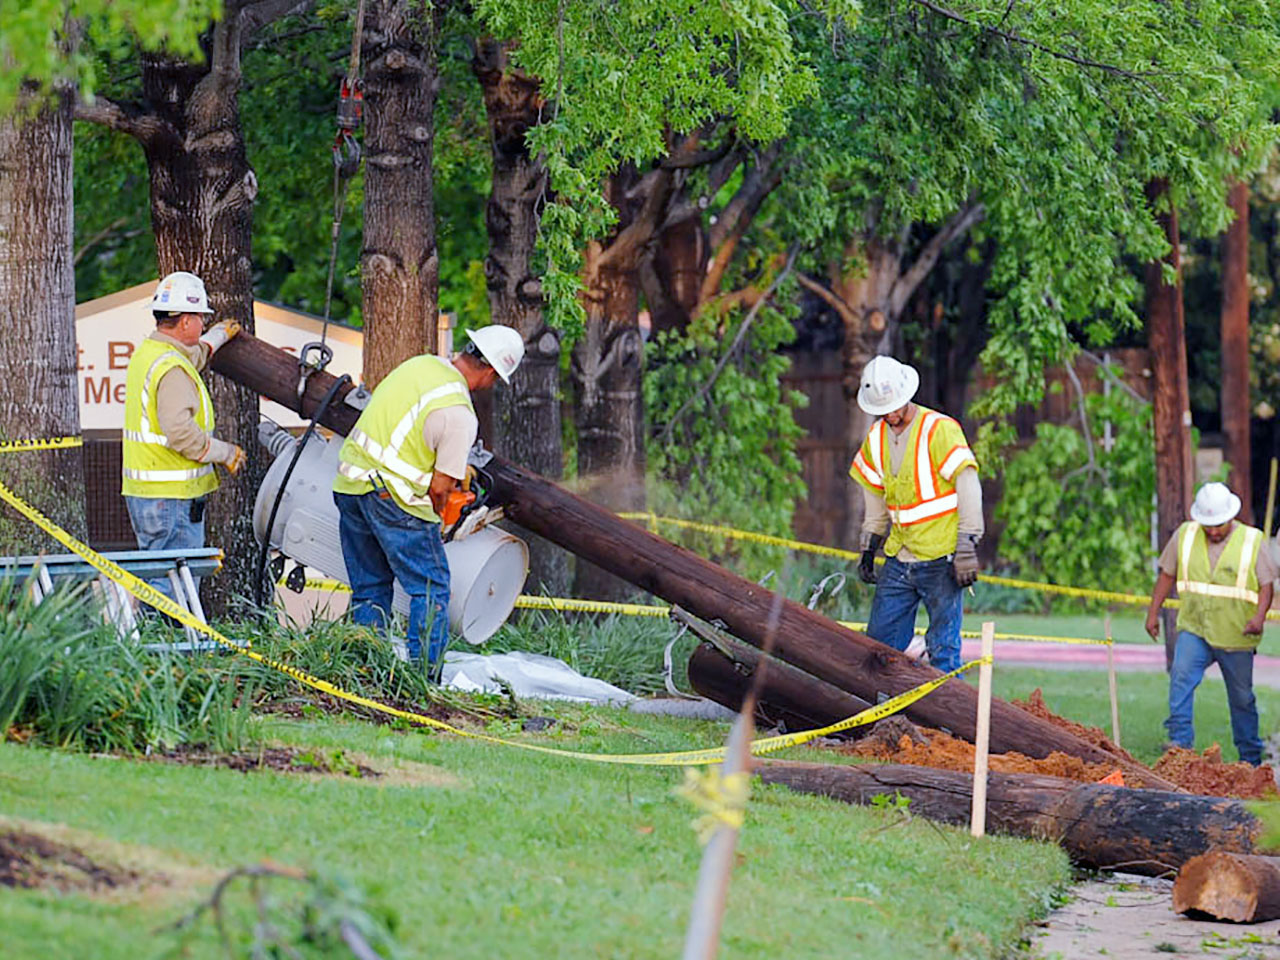 An Oncor vegetation management crew removes a tree limb tangled in power lines following a storm.